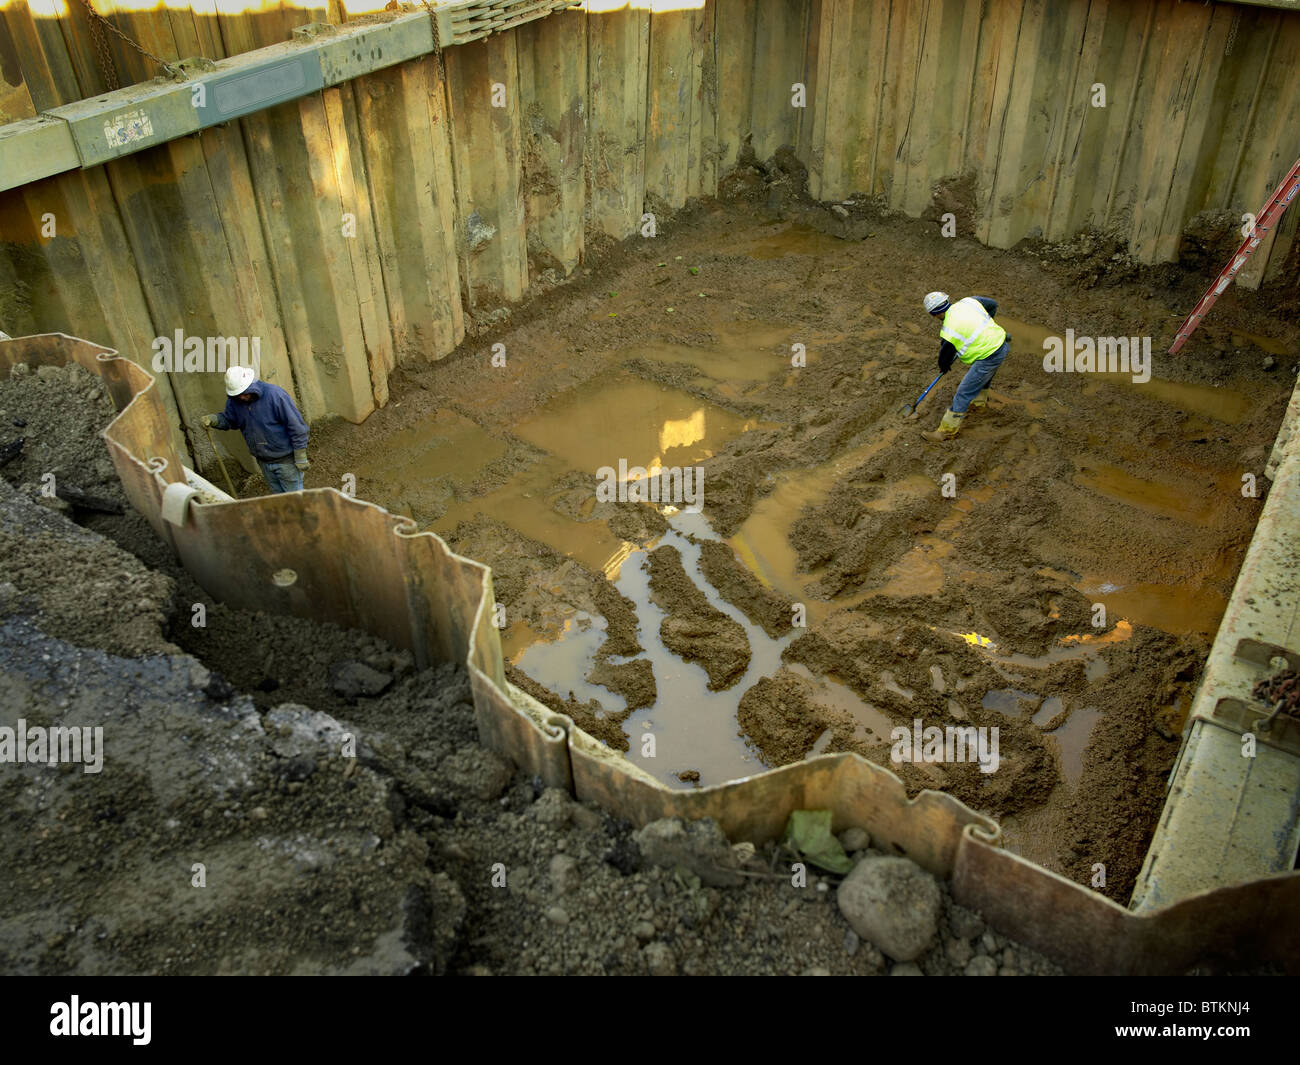 Construction Workers Preparing Hole For Petroleum Storage Tanks At Gasoline Petrol Station Stock Photo